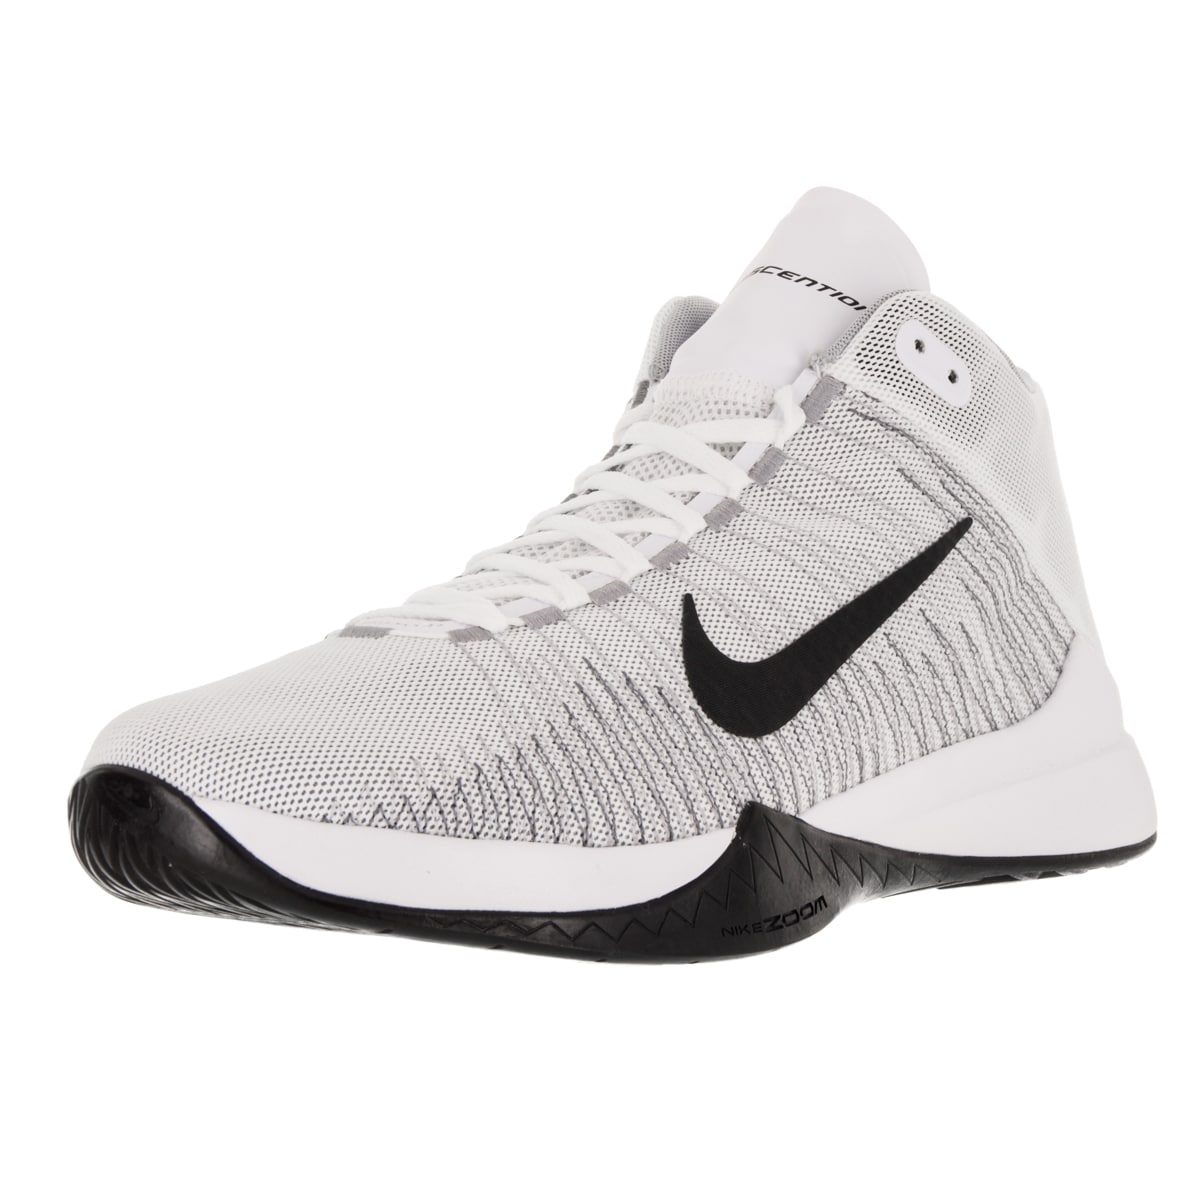 nike zoom ascention basketball